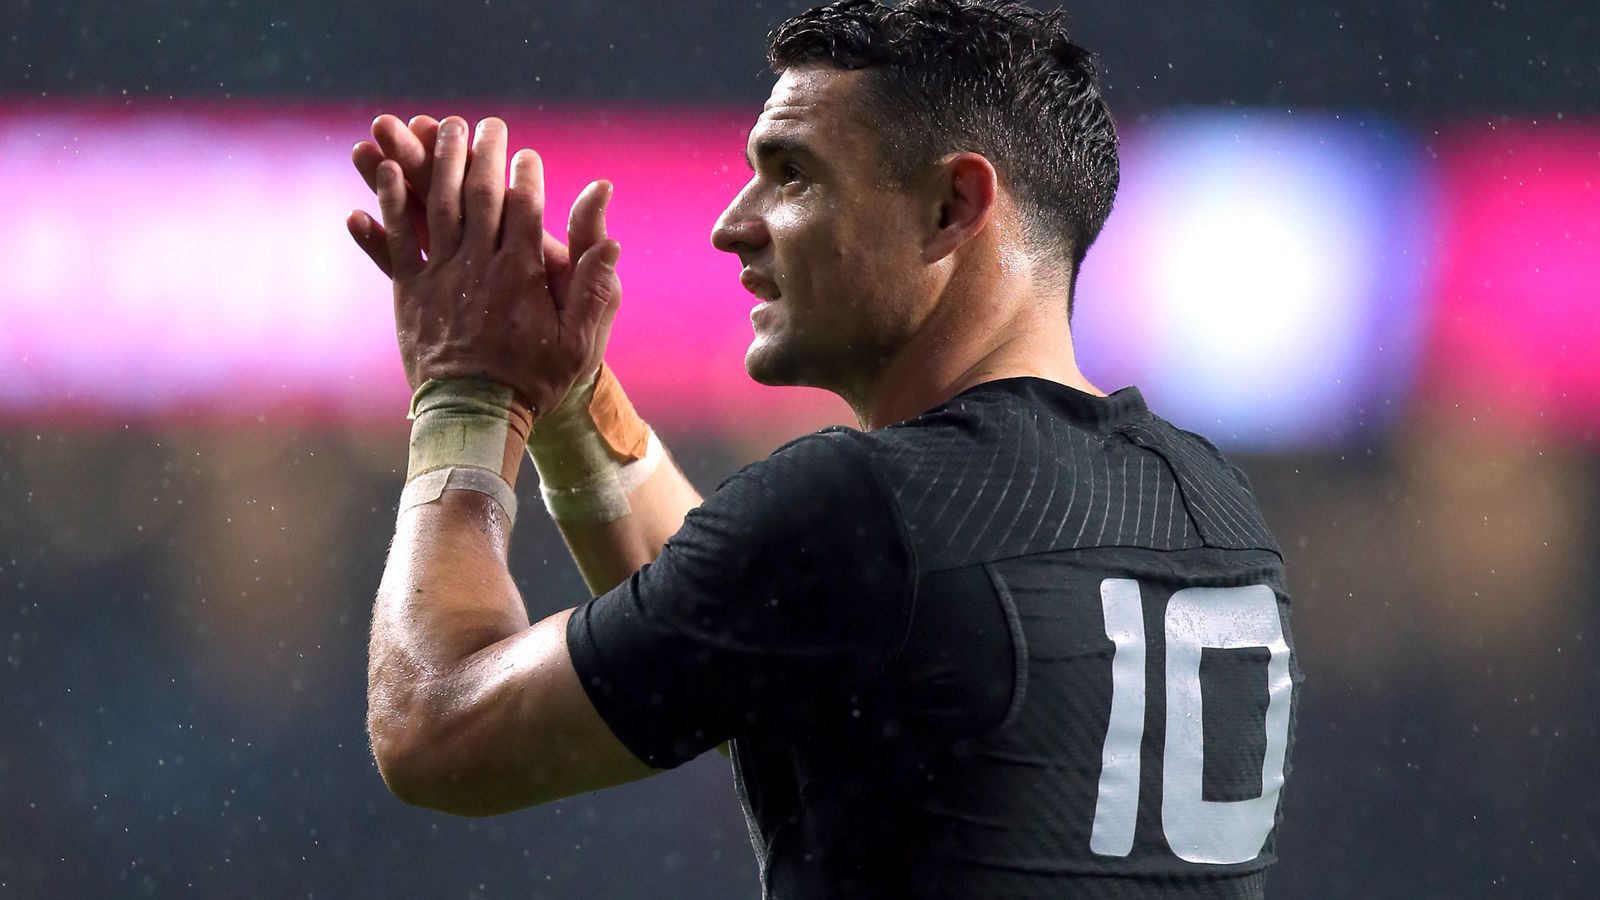 Dan Carter on X: We shall never know all the good that a simple